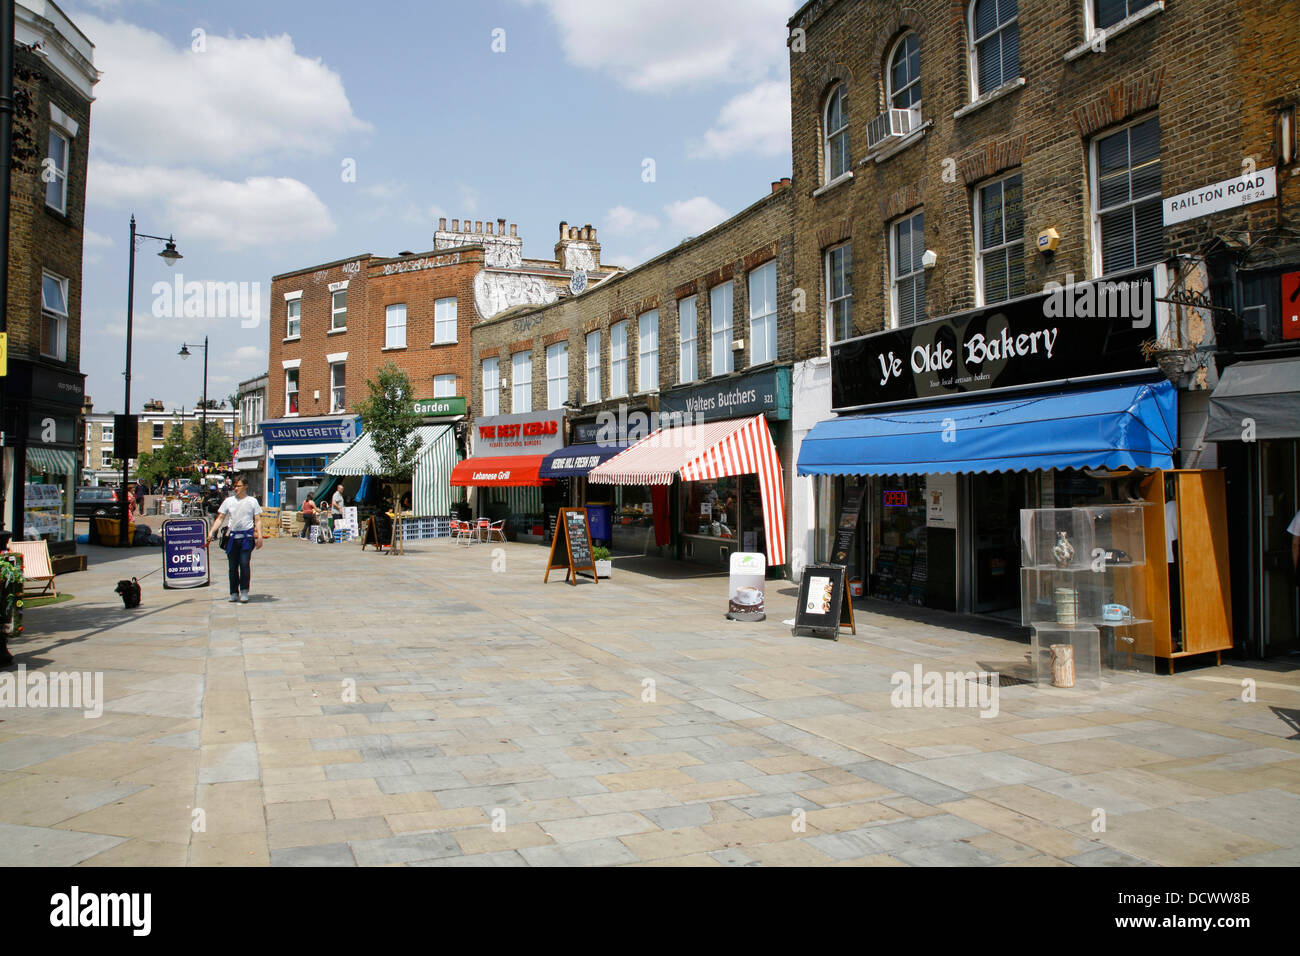 Independent shops on Railton Road, Herne Hill, London, UK Stock Photo